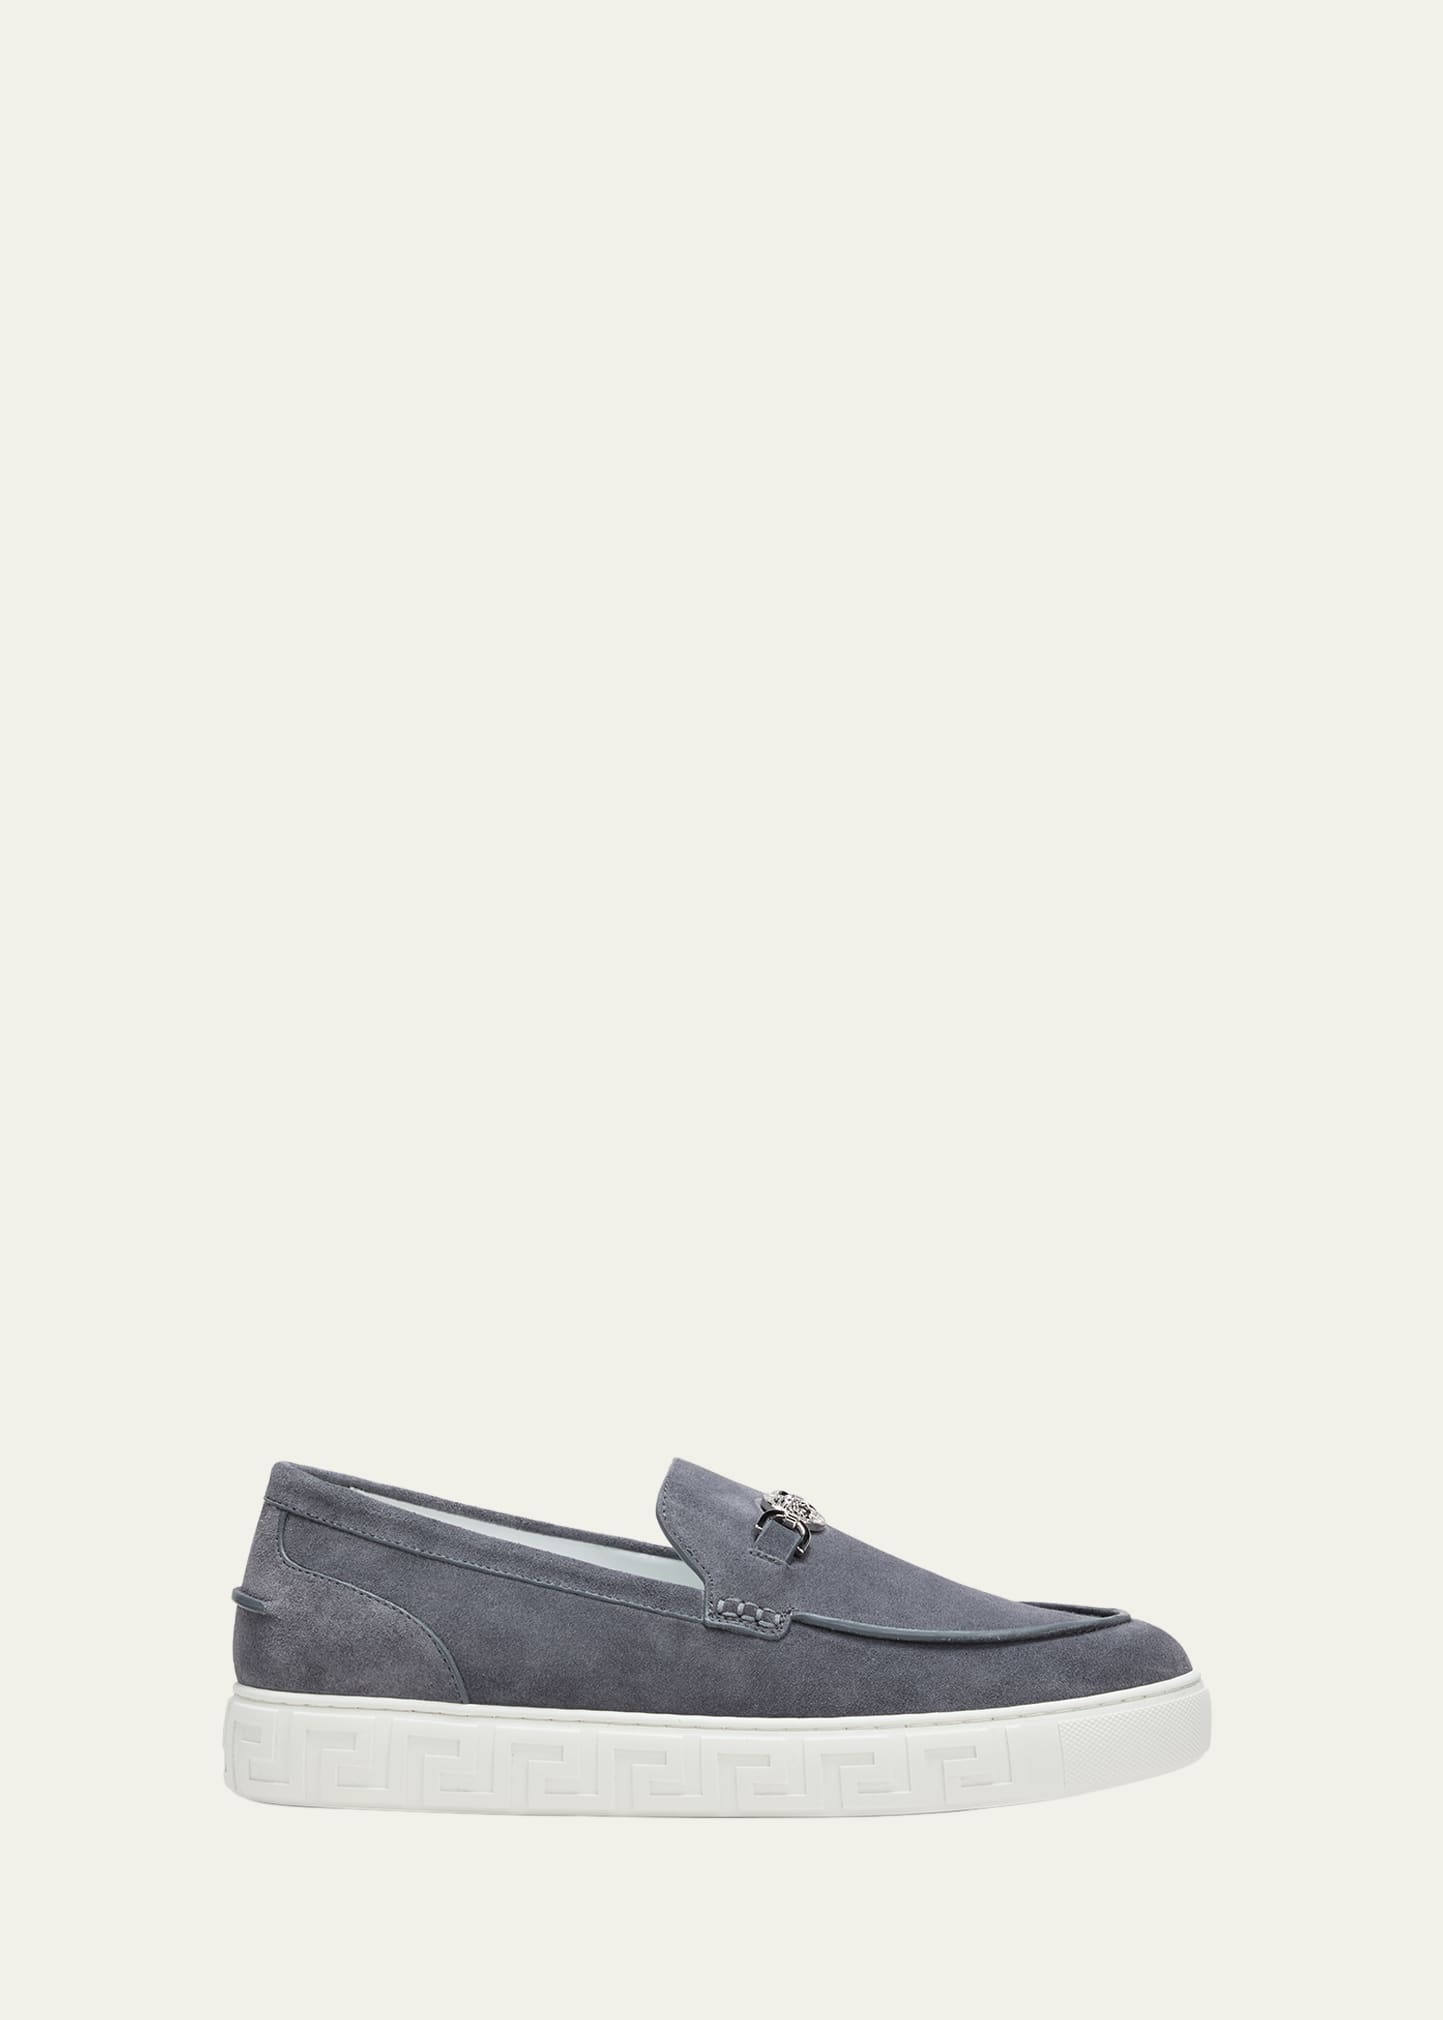 Versace Men's Medusa Coin Suede Hybrid Loafers In Grey